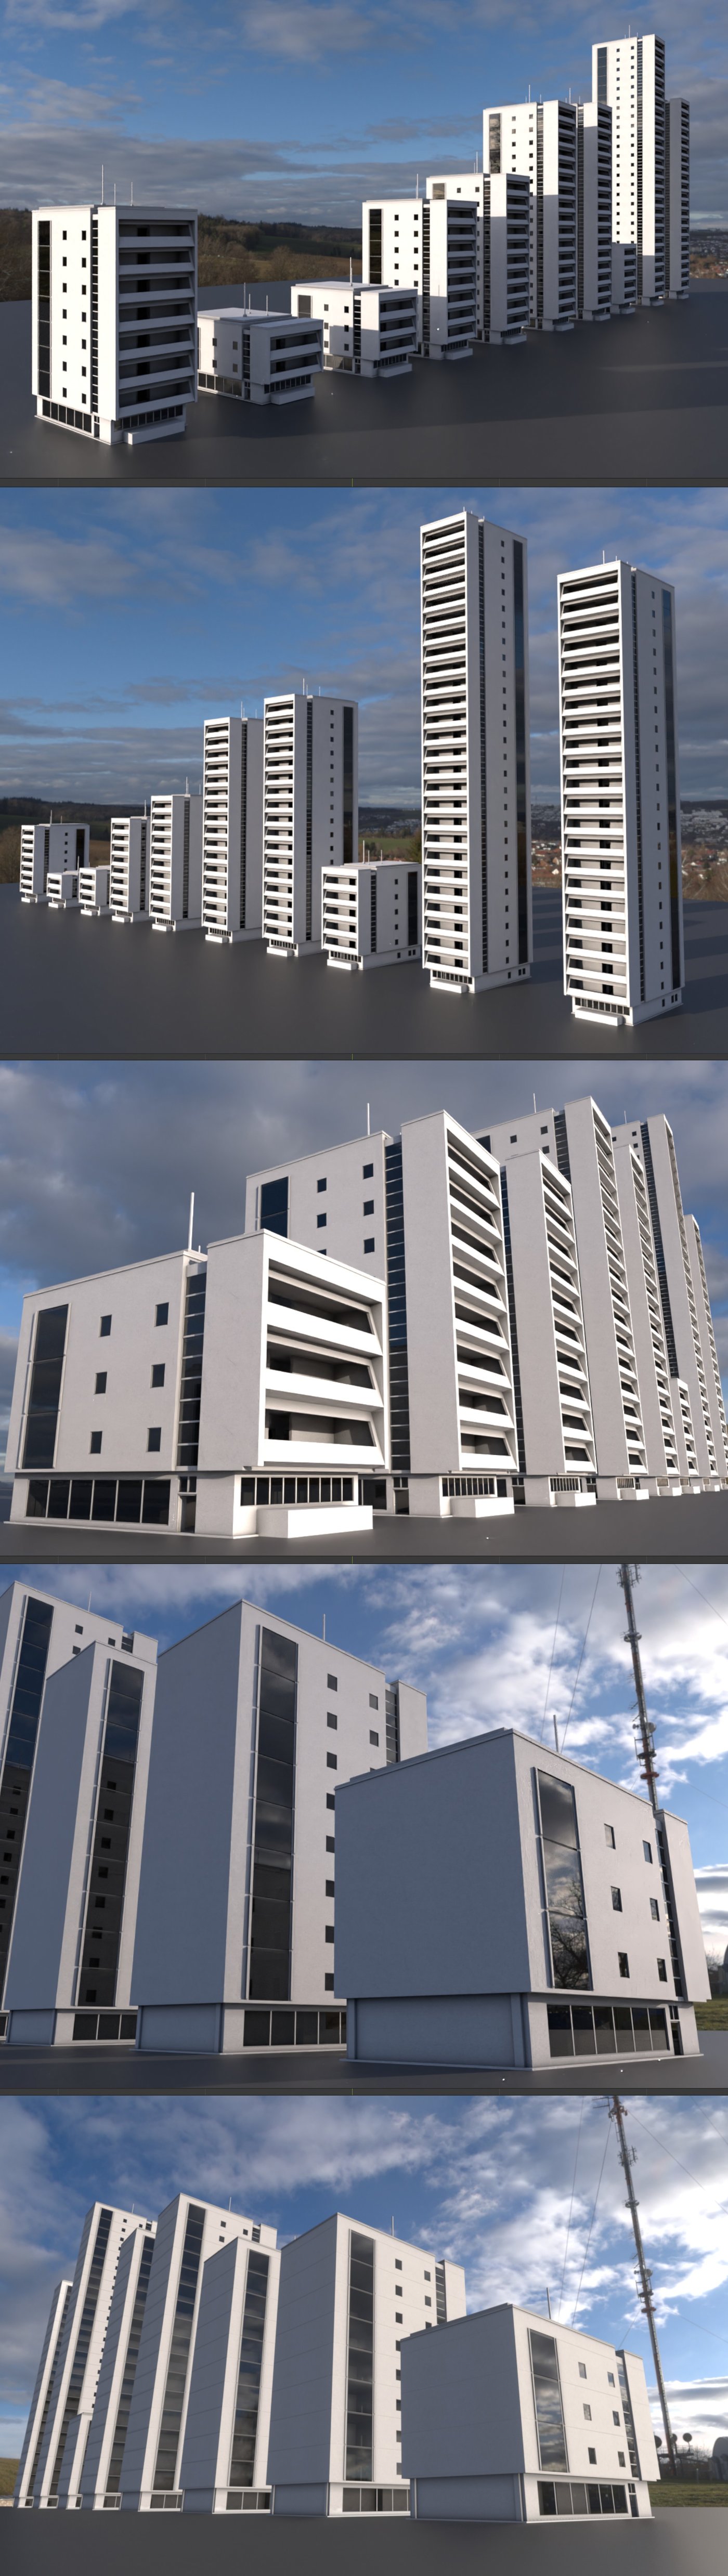 Residential Buildings Set upgrade for a use in Blender 2-91